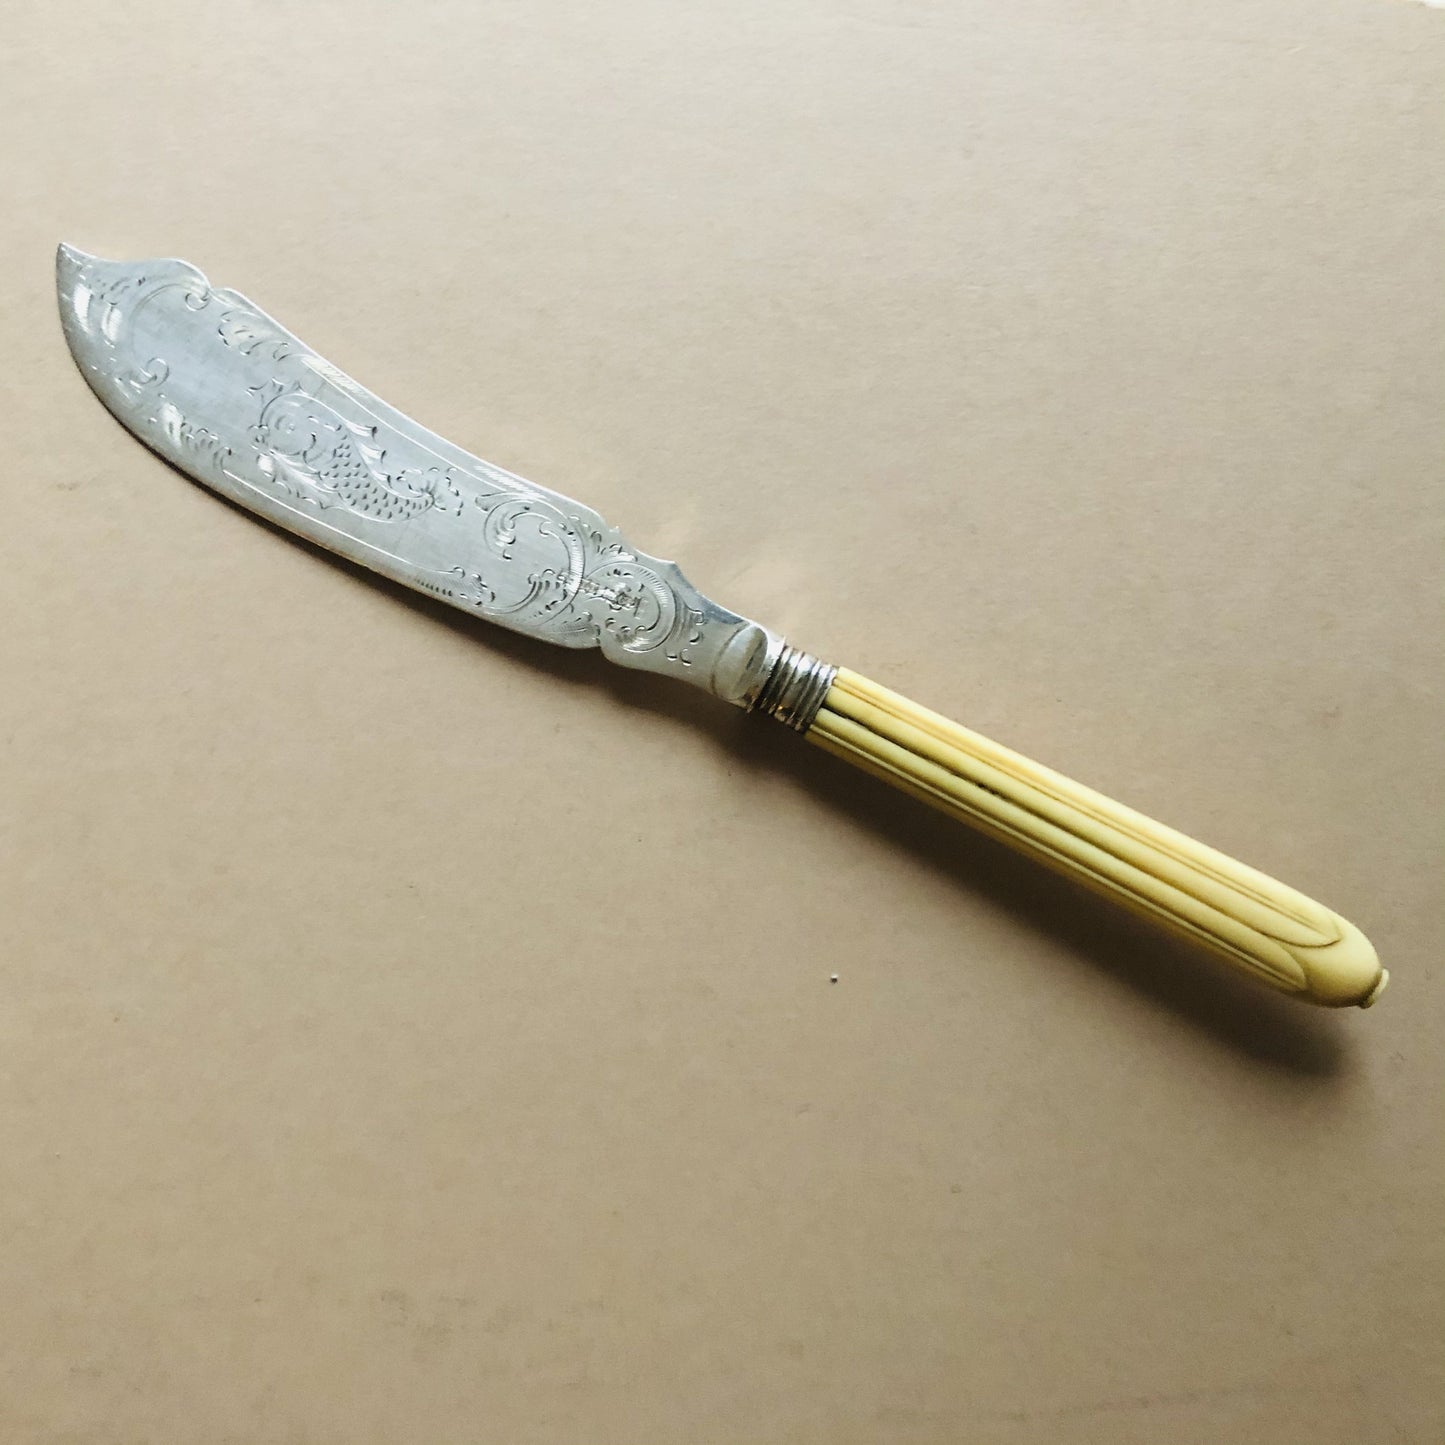 The Headhunter Alex - Antique Silver Engraved Fish Knife